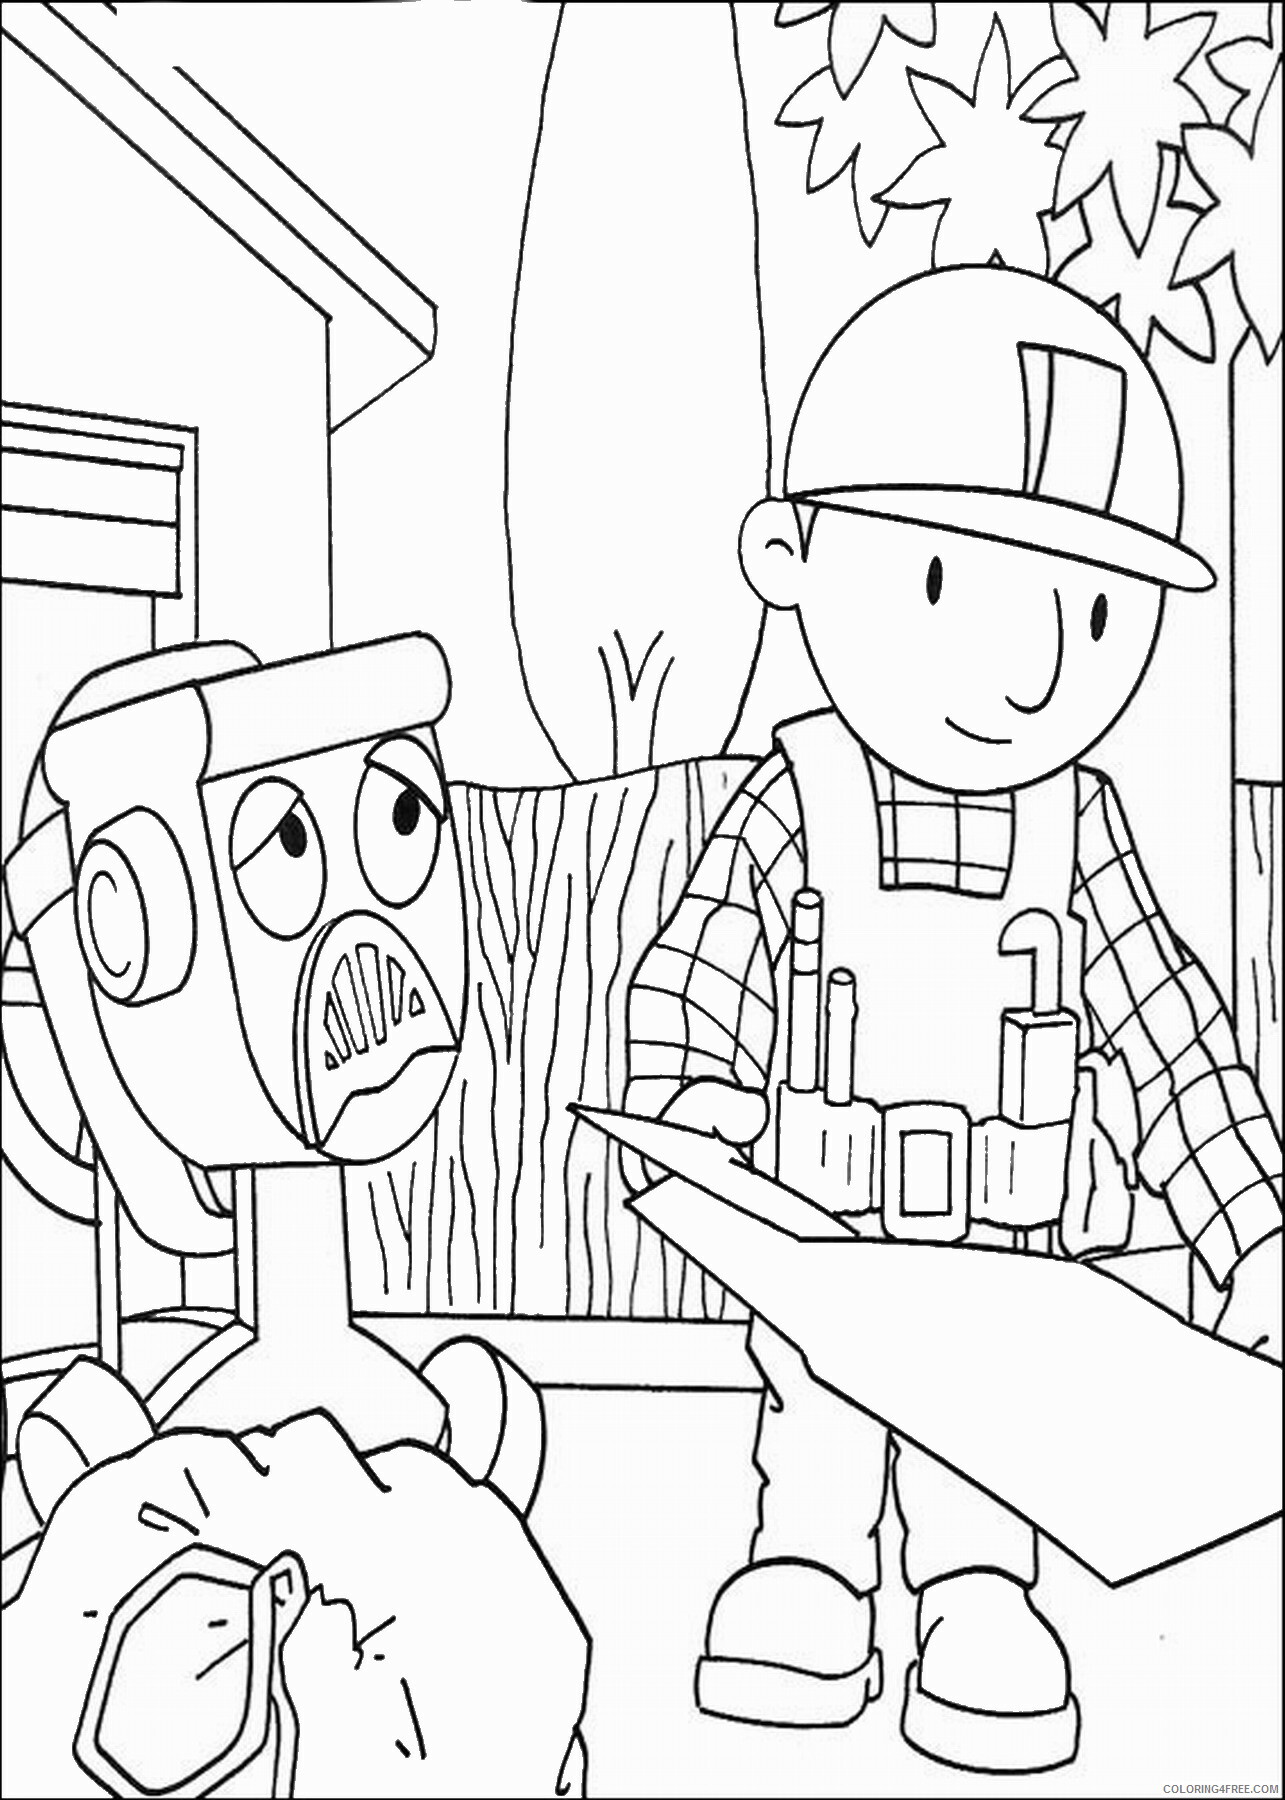 Bob the Builder Coloring Pages TV Film bob the builder_20 Printable 2020 00970 Coloring4free